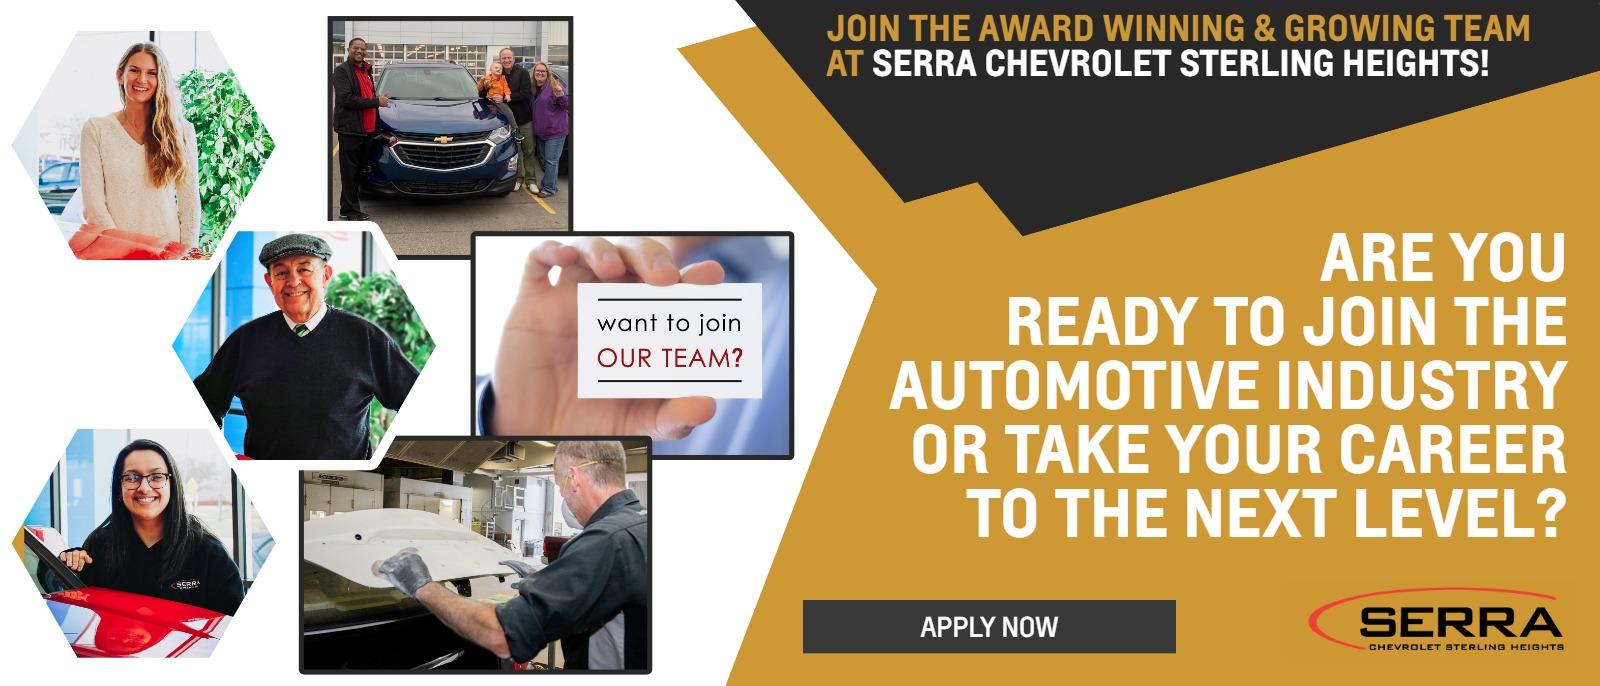 Are you ready to join the automotive industry or take your career to the next level?
Join the award winning & growing team at Serra Whelan Chevrolet!